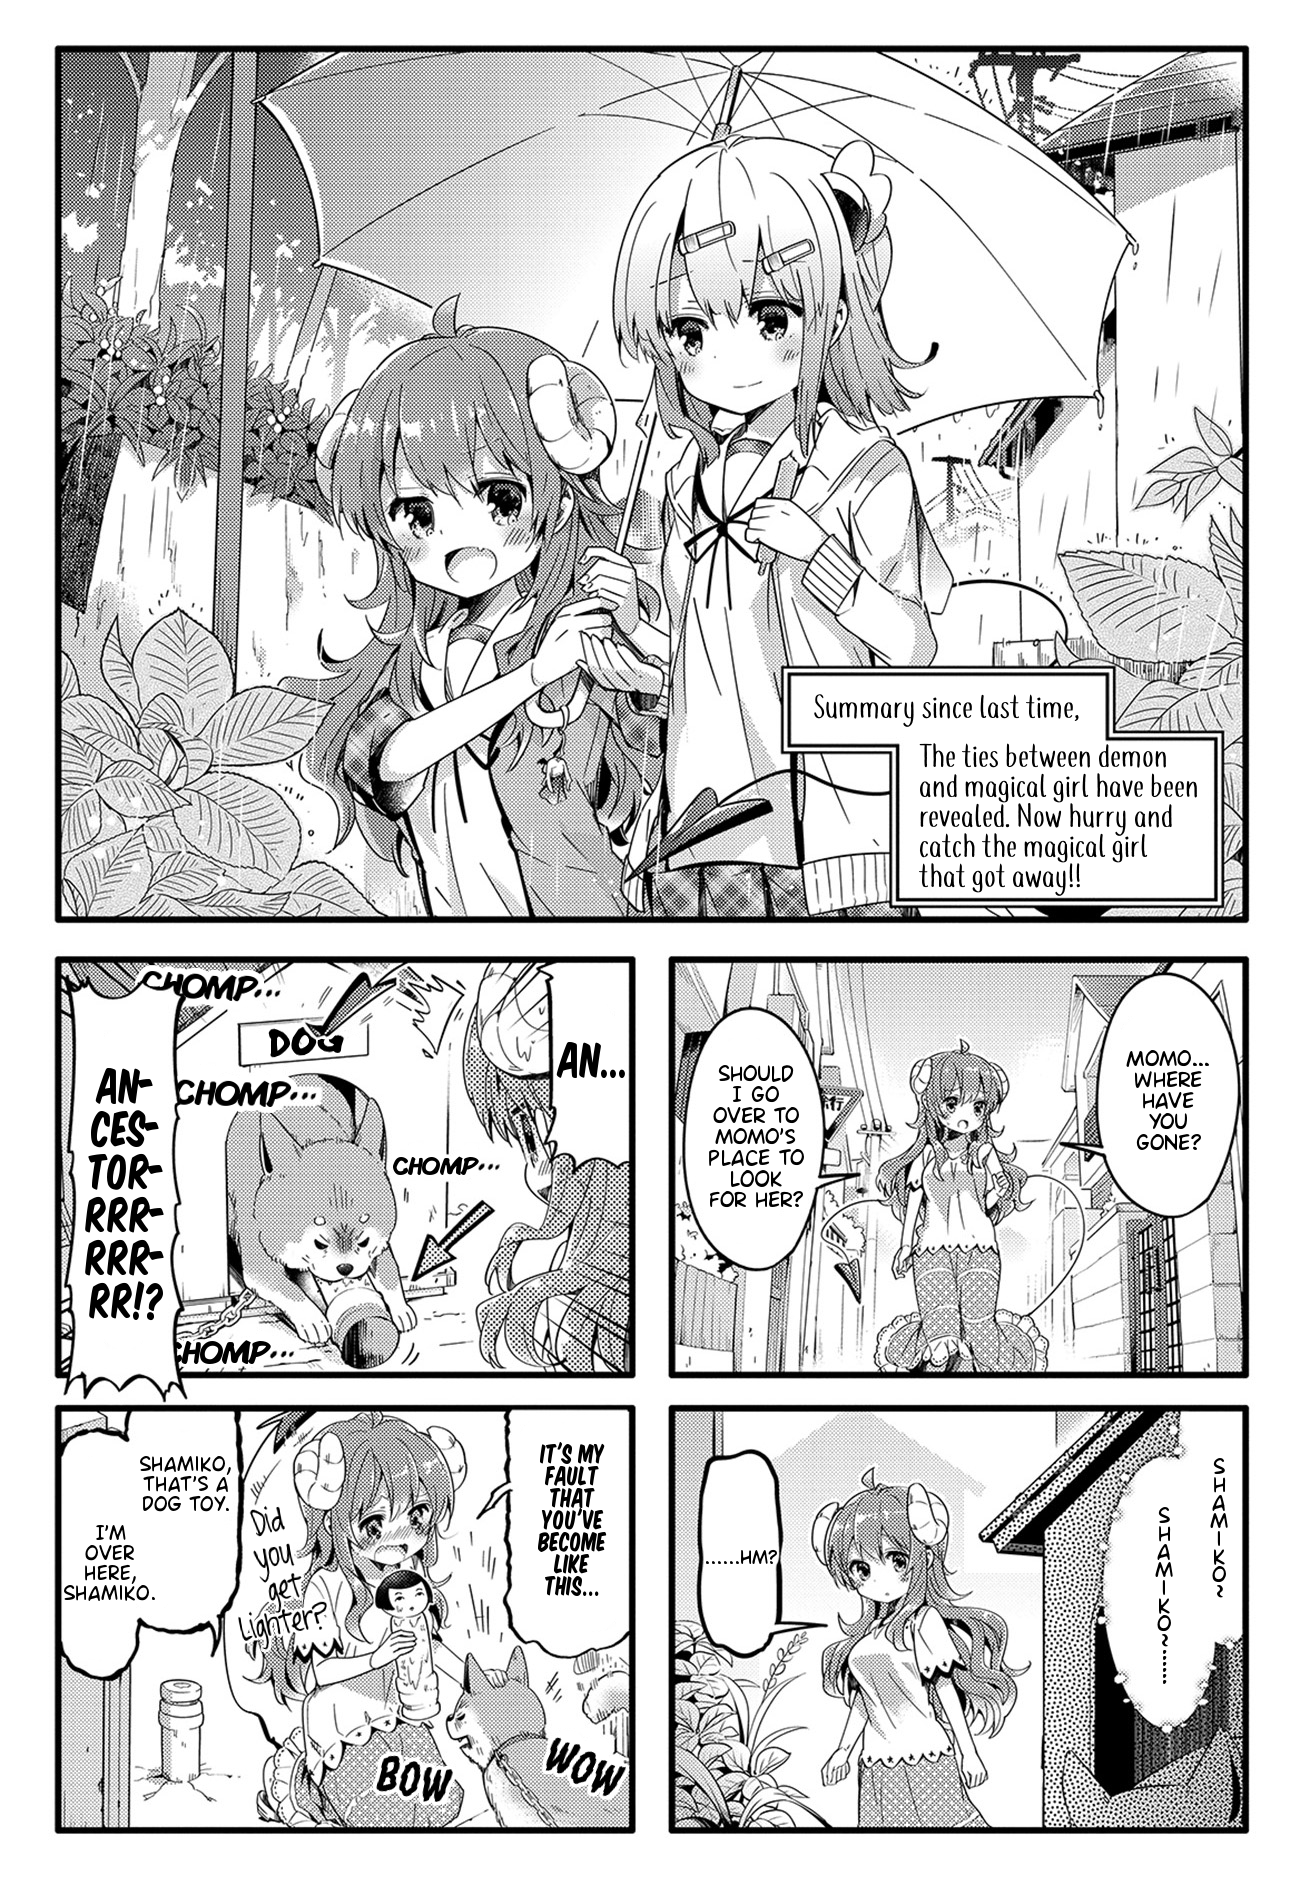 Machikado Mazoku Vol.2 Chapter 26: Conveying Thoughts!! Demon Takes A New Step!! - Picture 1